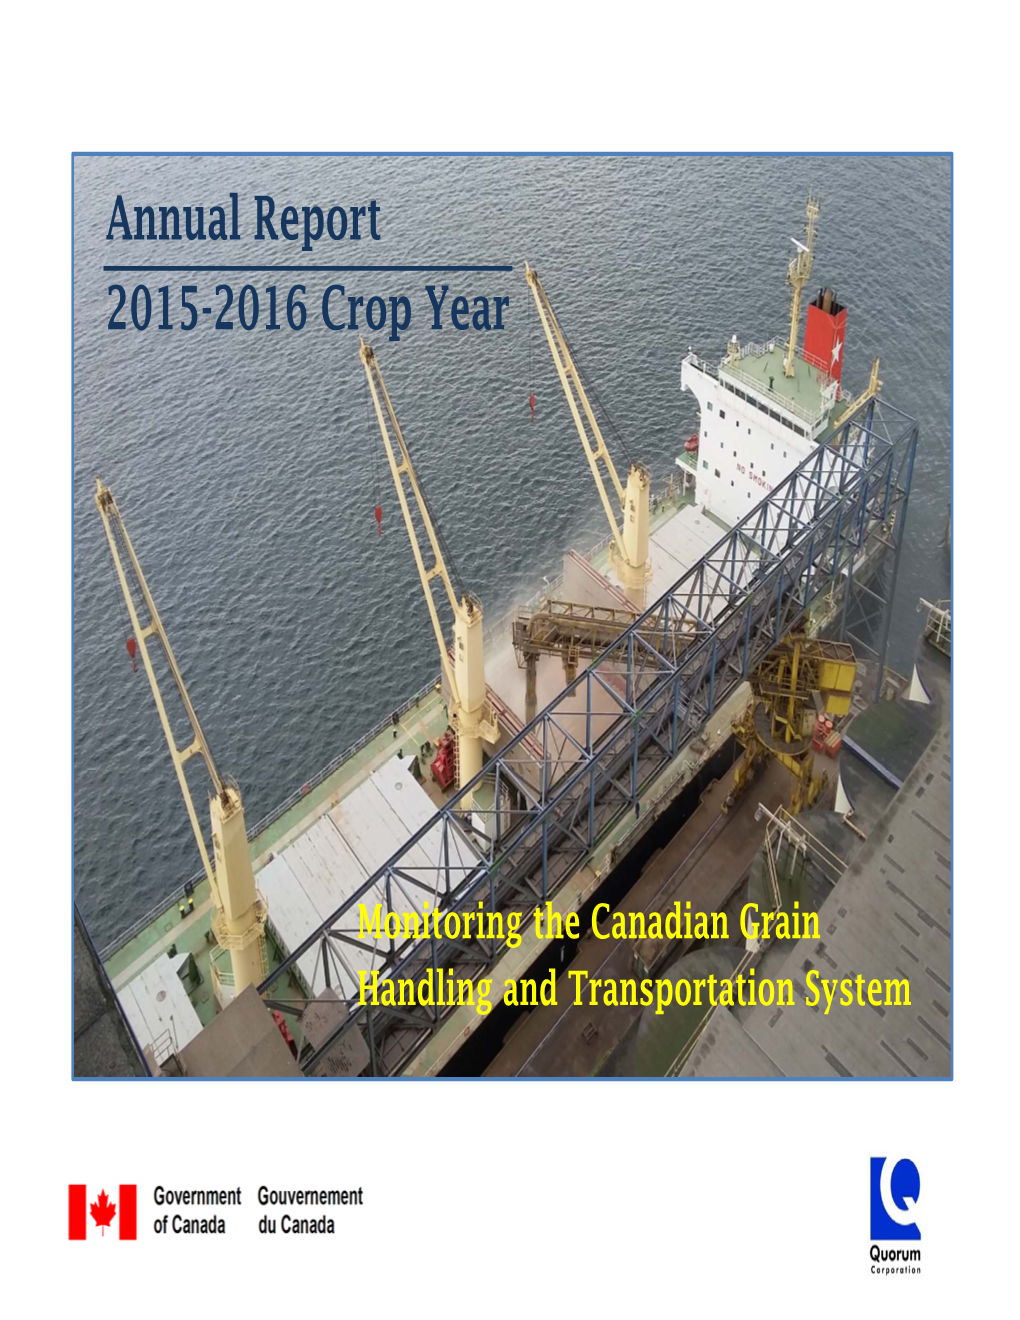 Annual Report 2015-2016 Crop Year